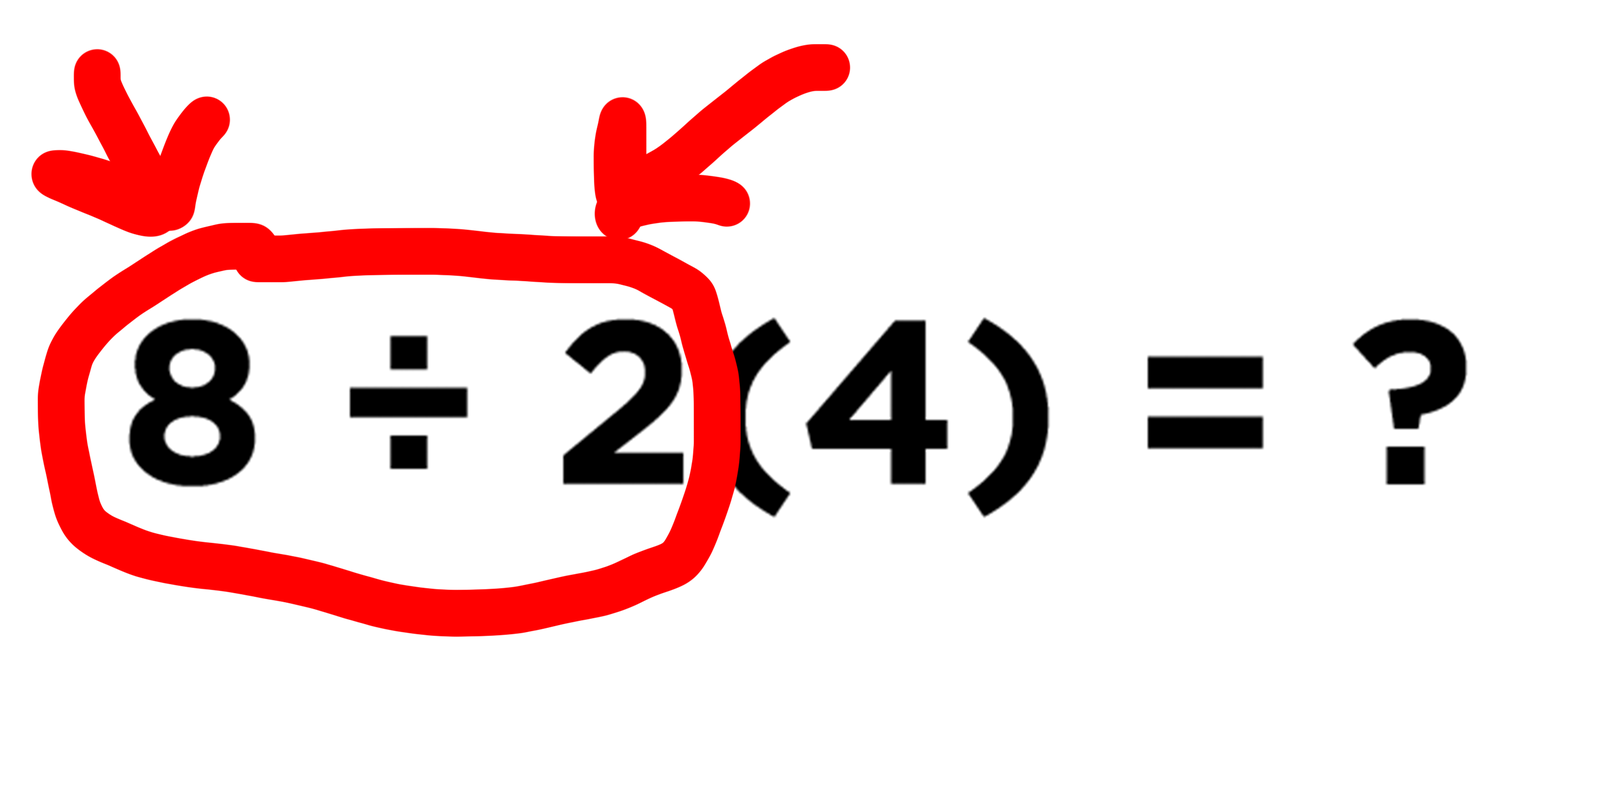 simple math equations unsolved